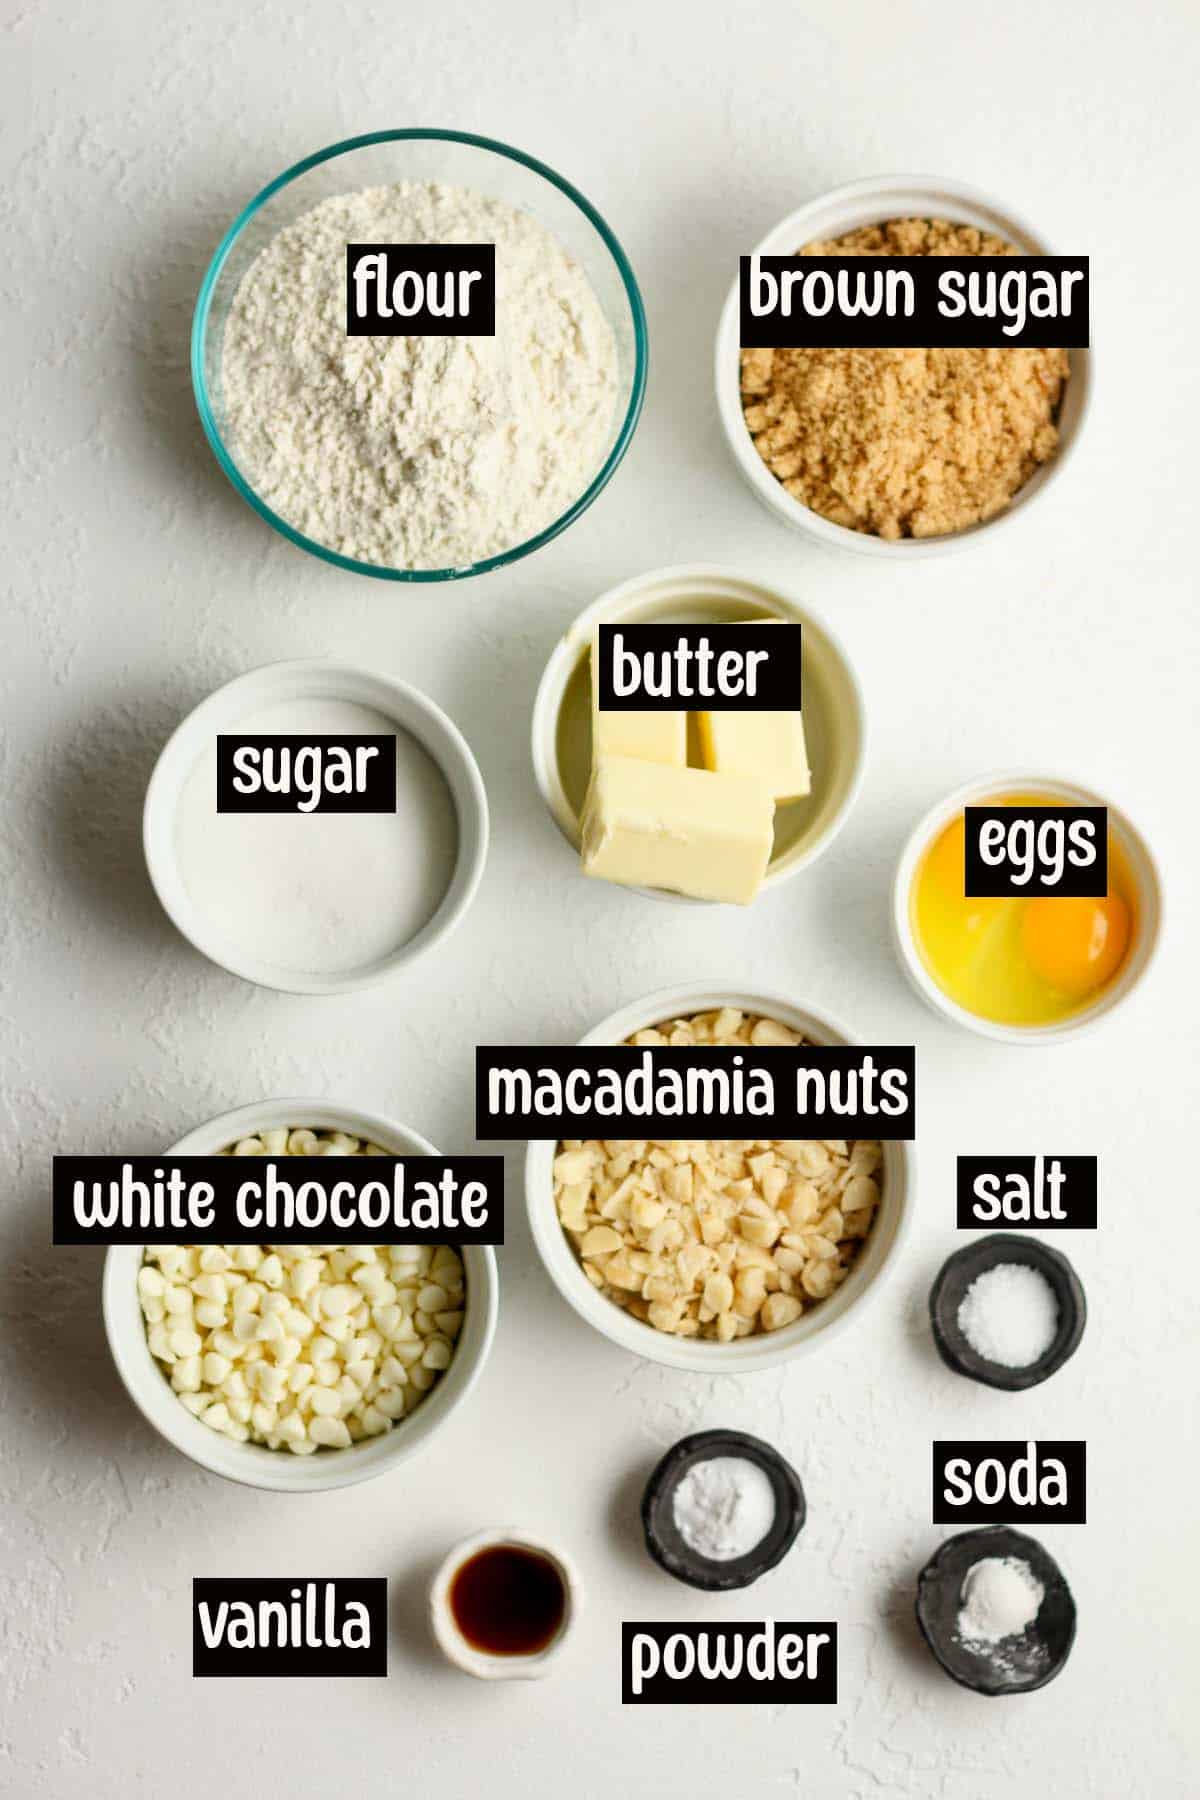 Labeled ingredients on a white background.